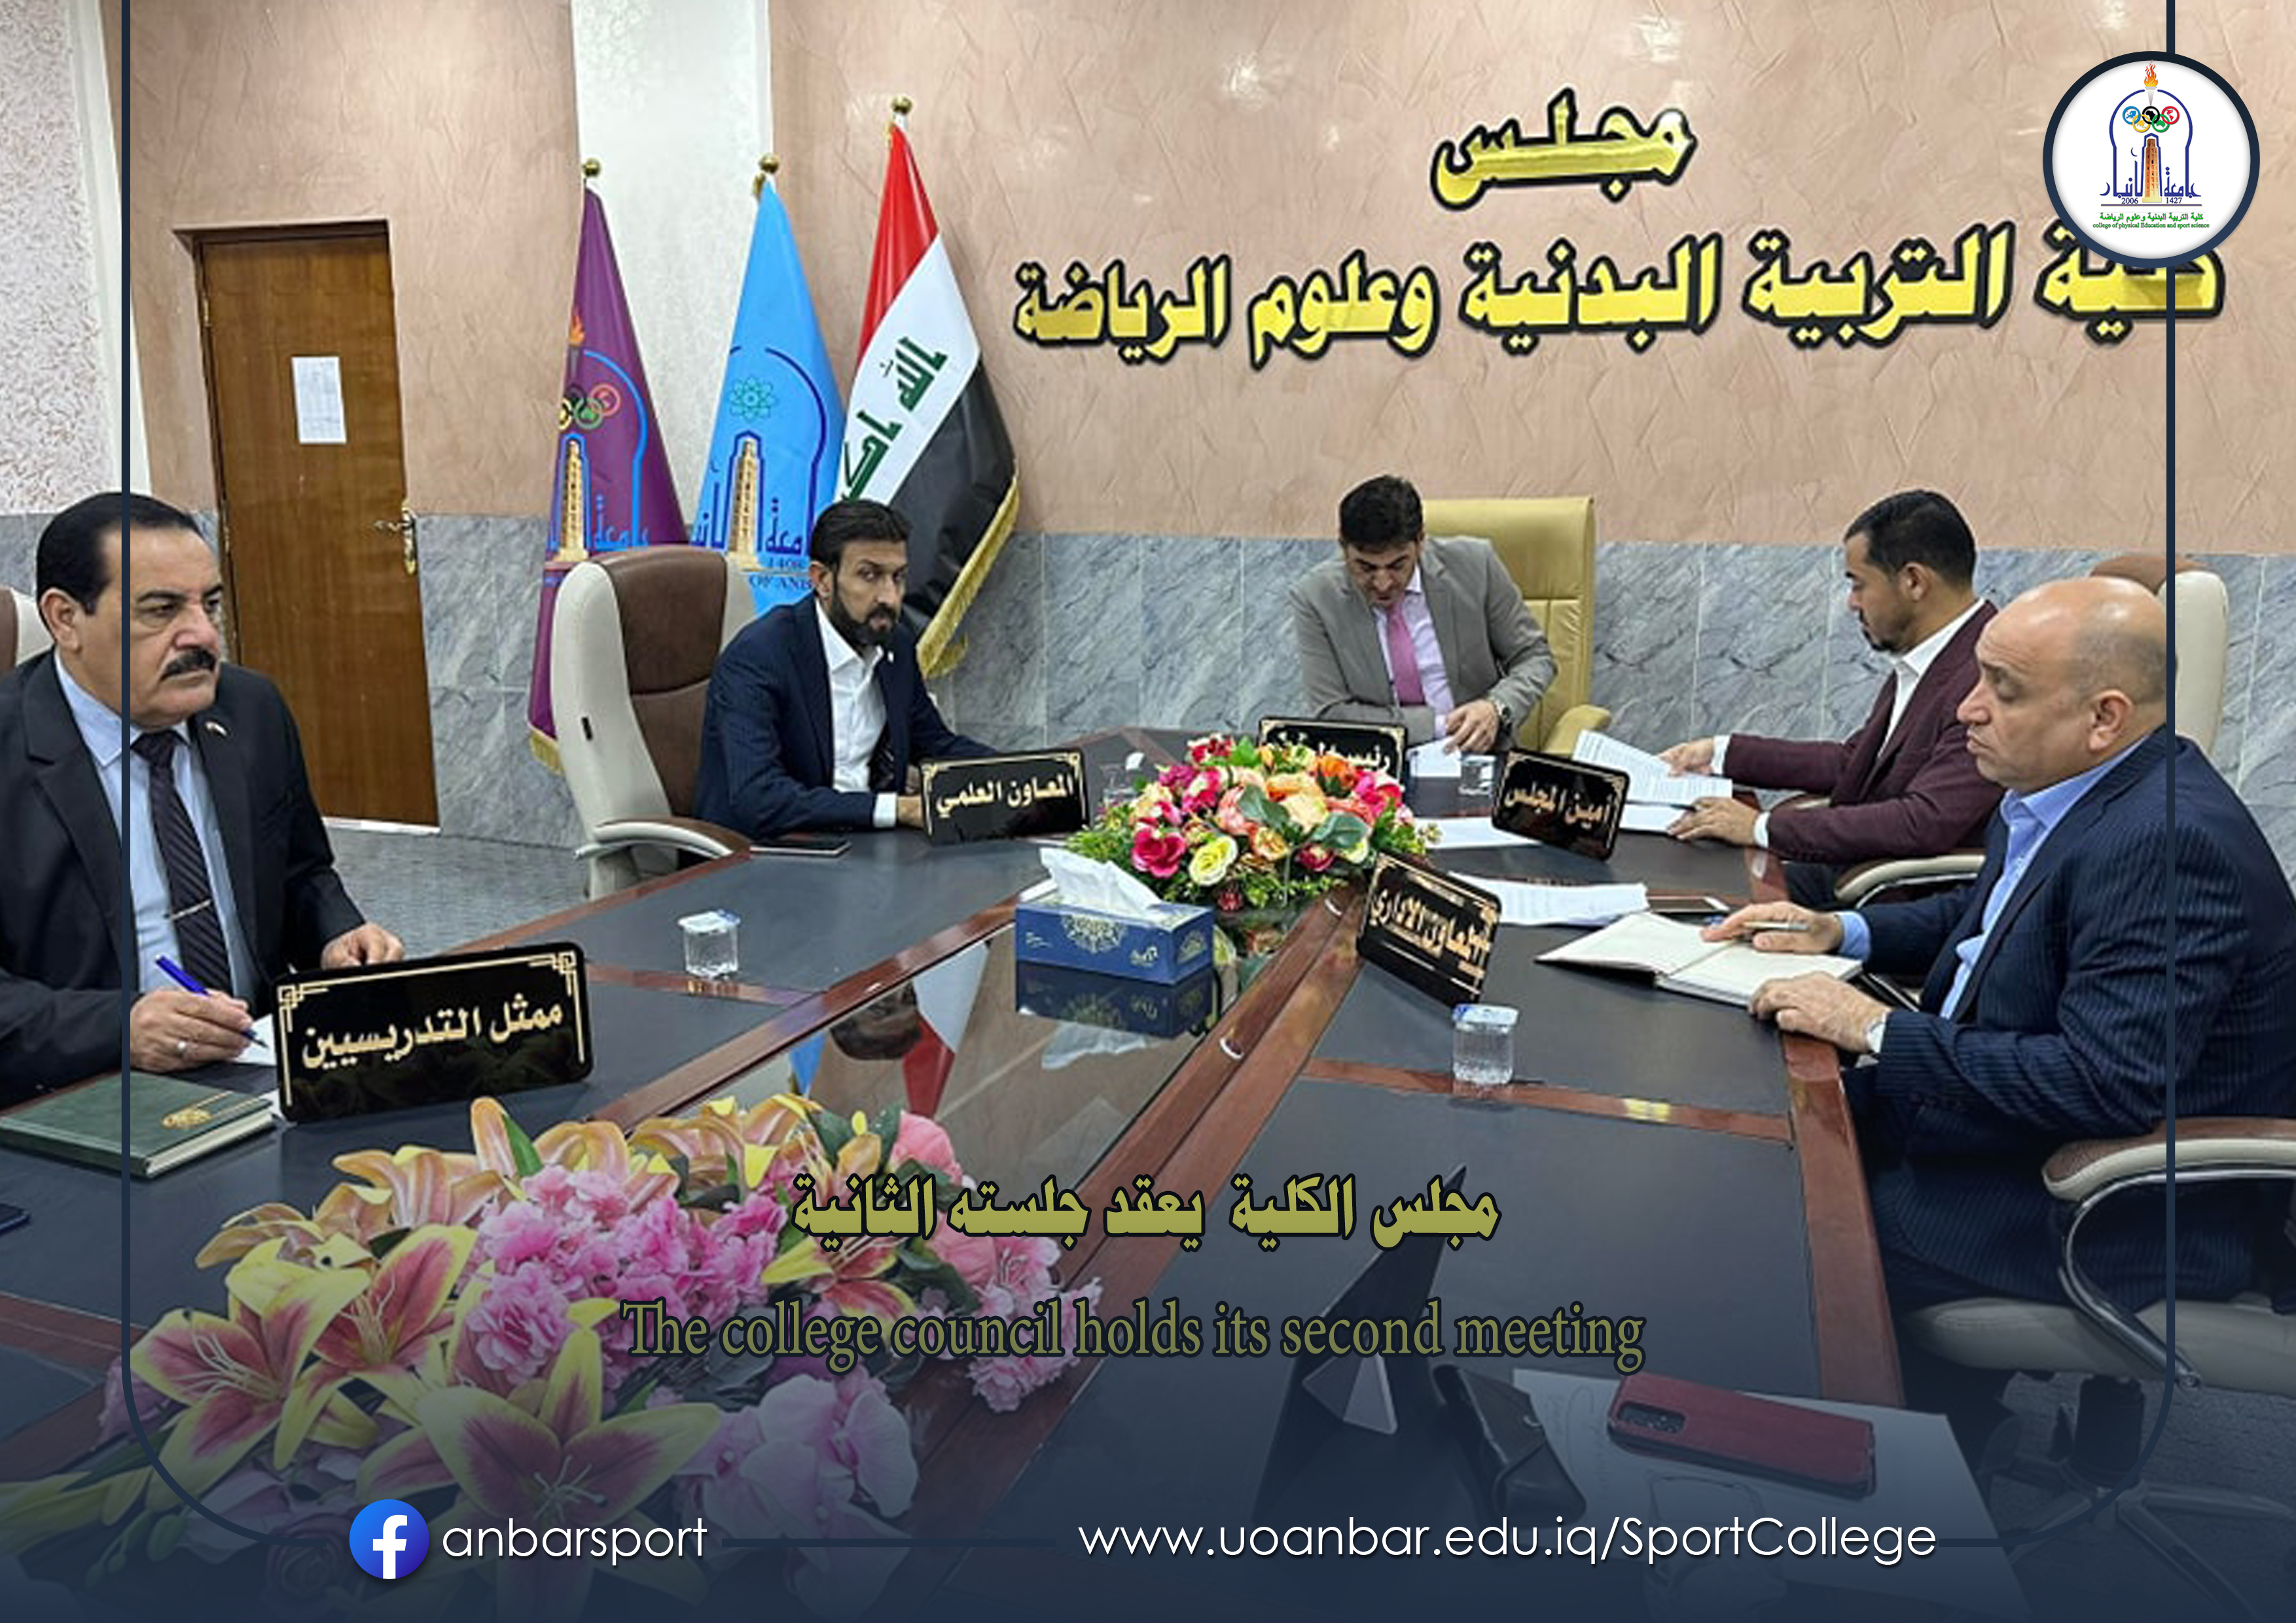 The college council holds its second meeting